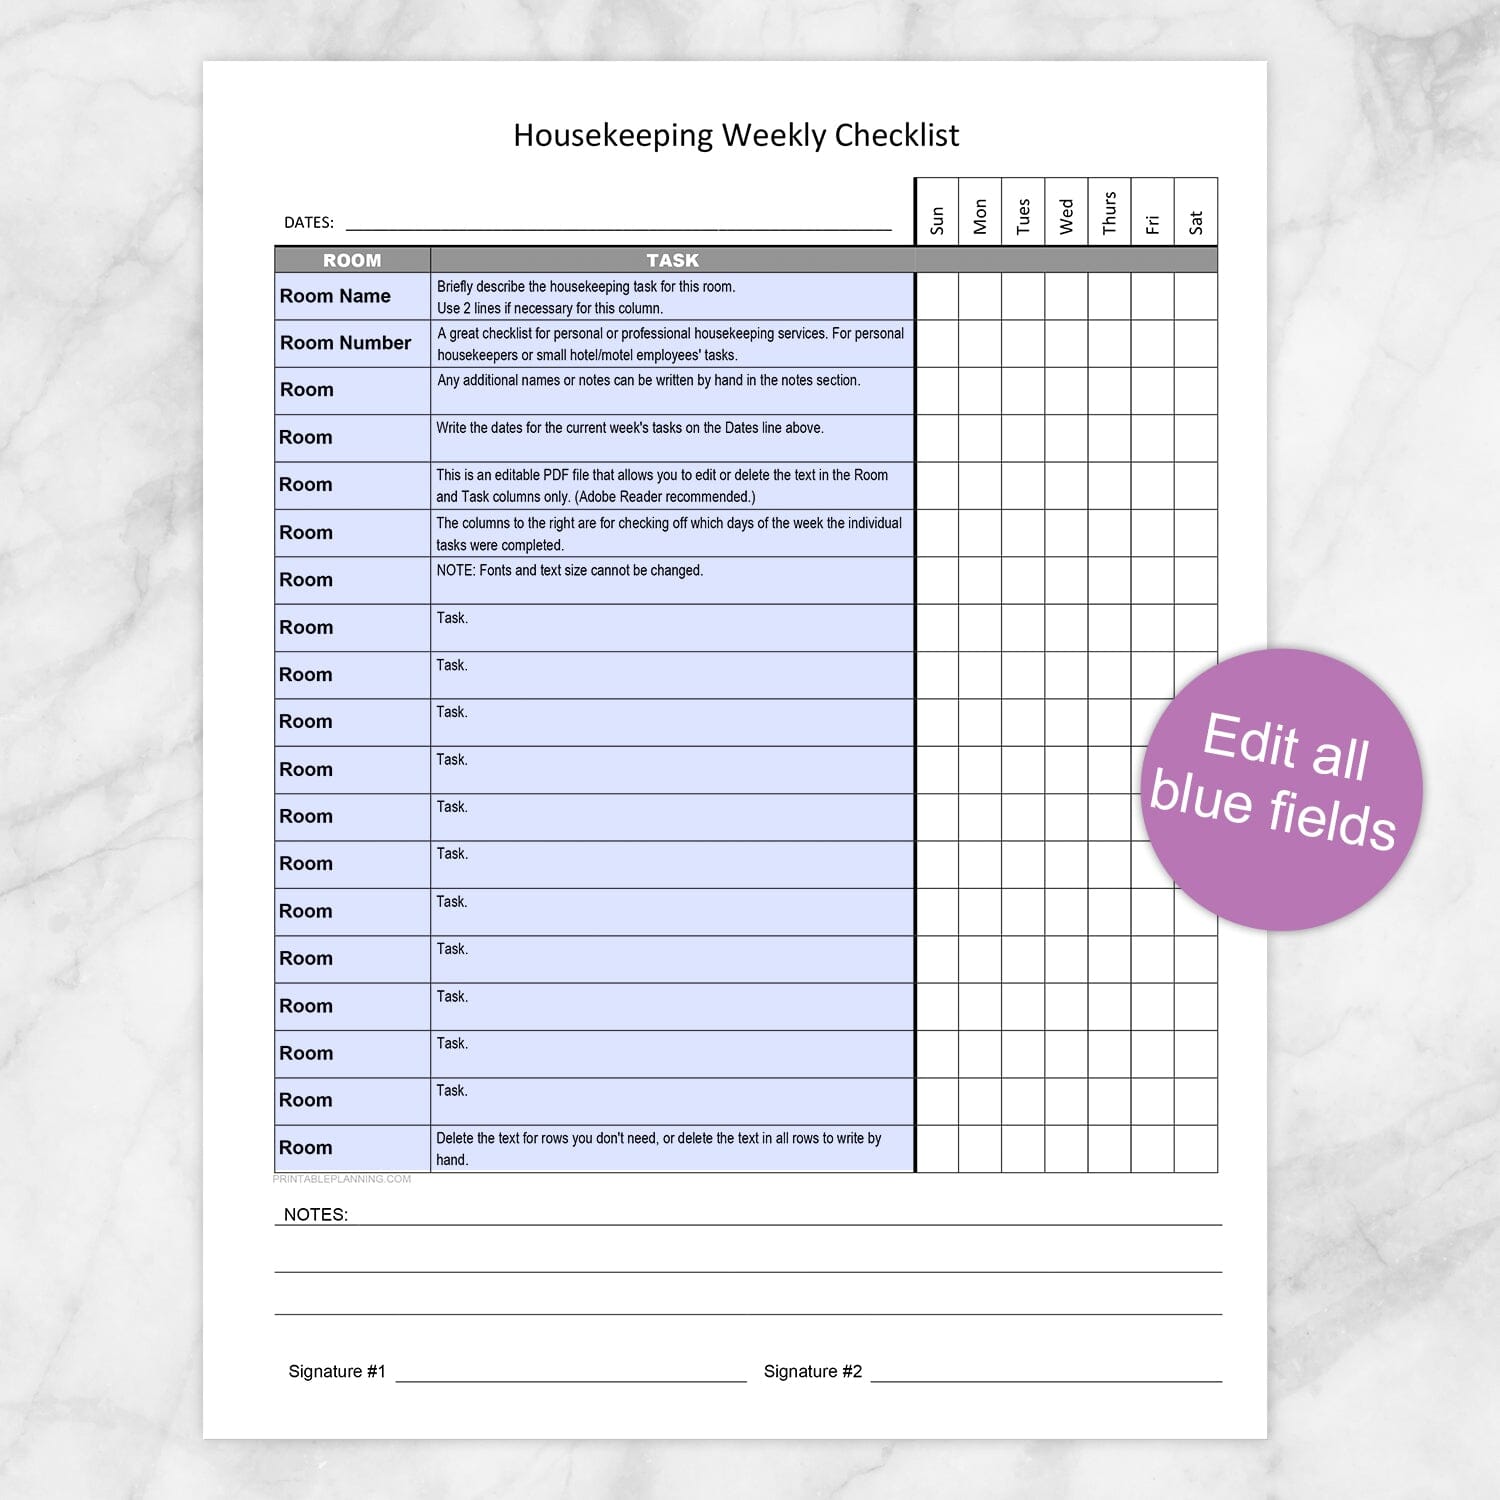 Printable Housekeeping Weekly Checklist - Cleaning Services Editable Room and Task List at Printable Planning. Edit all blue fields.